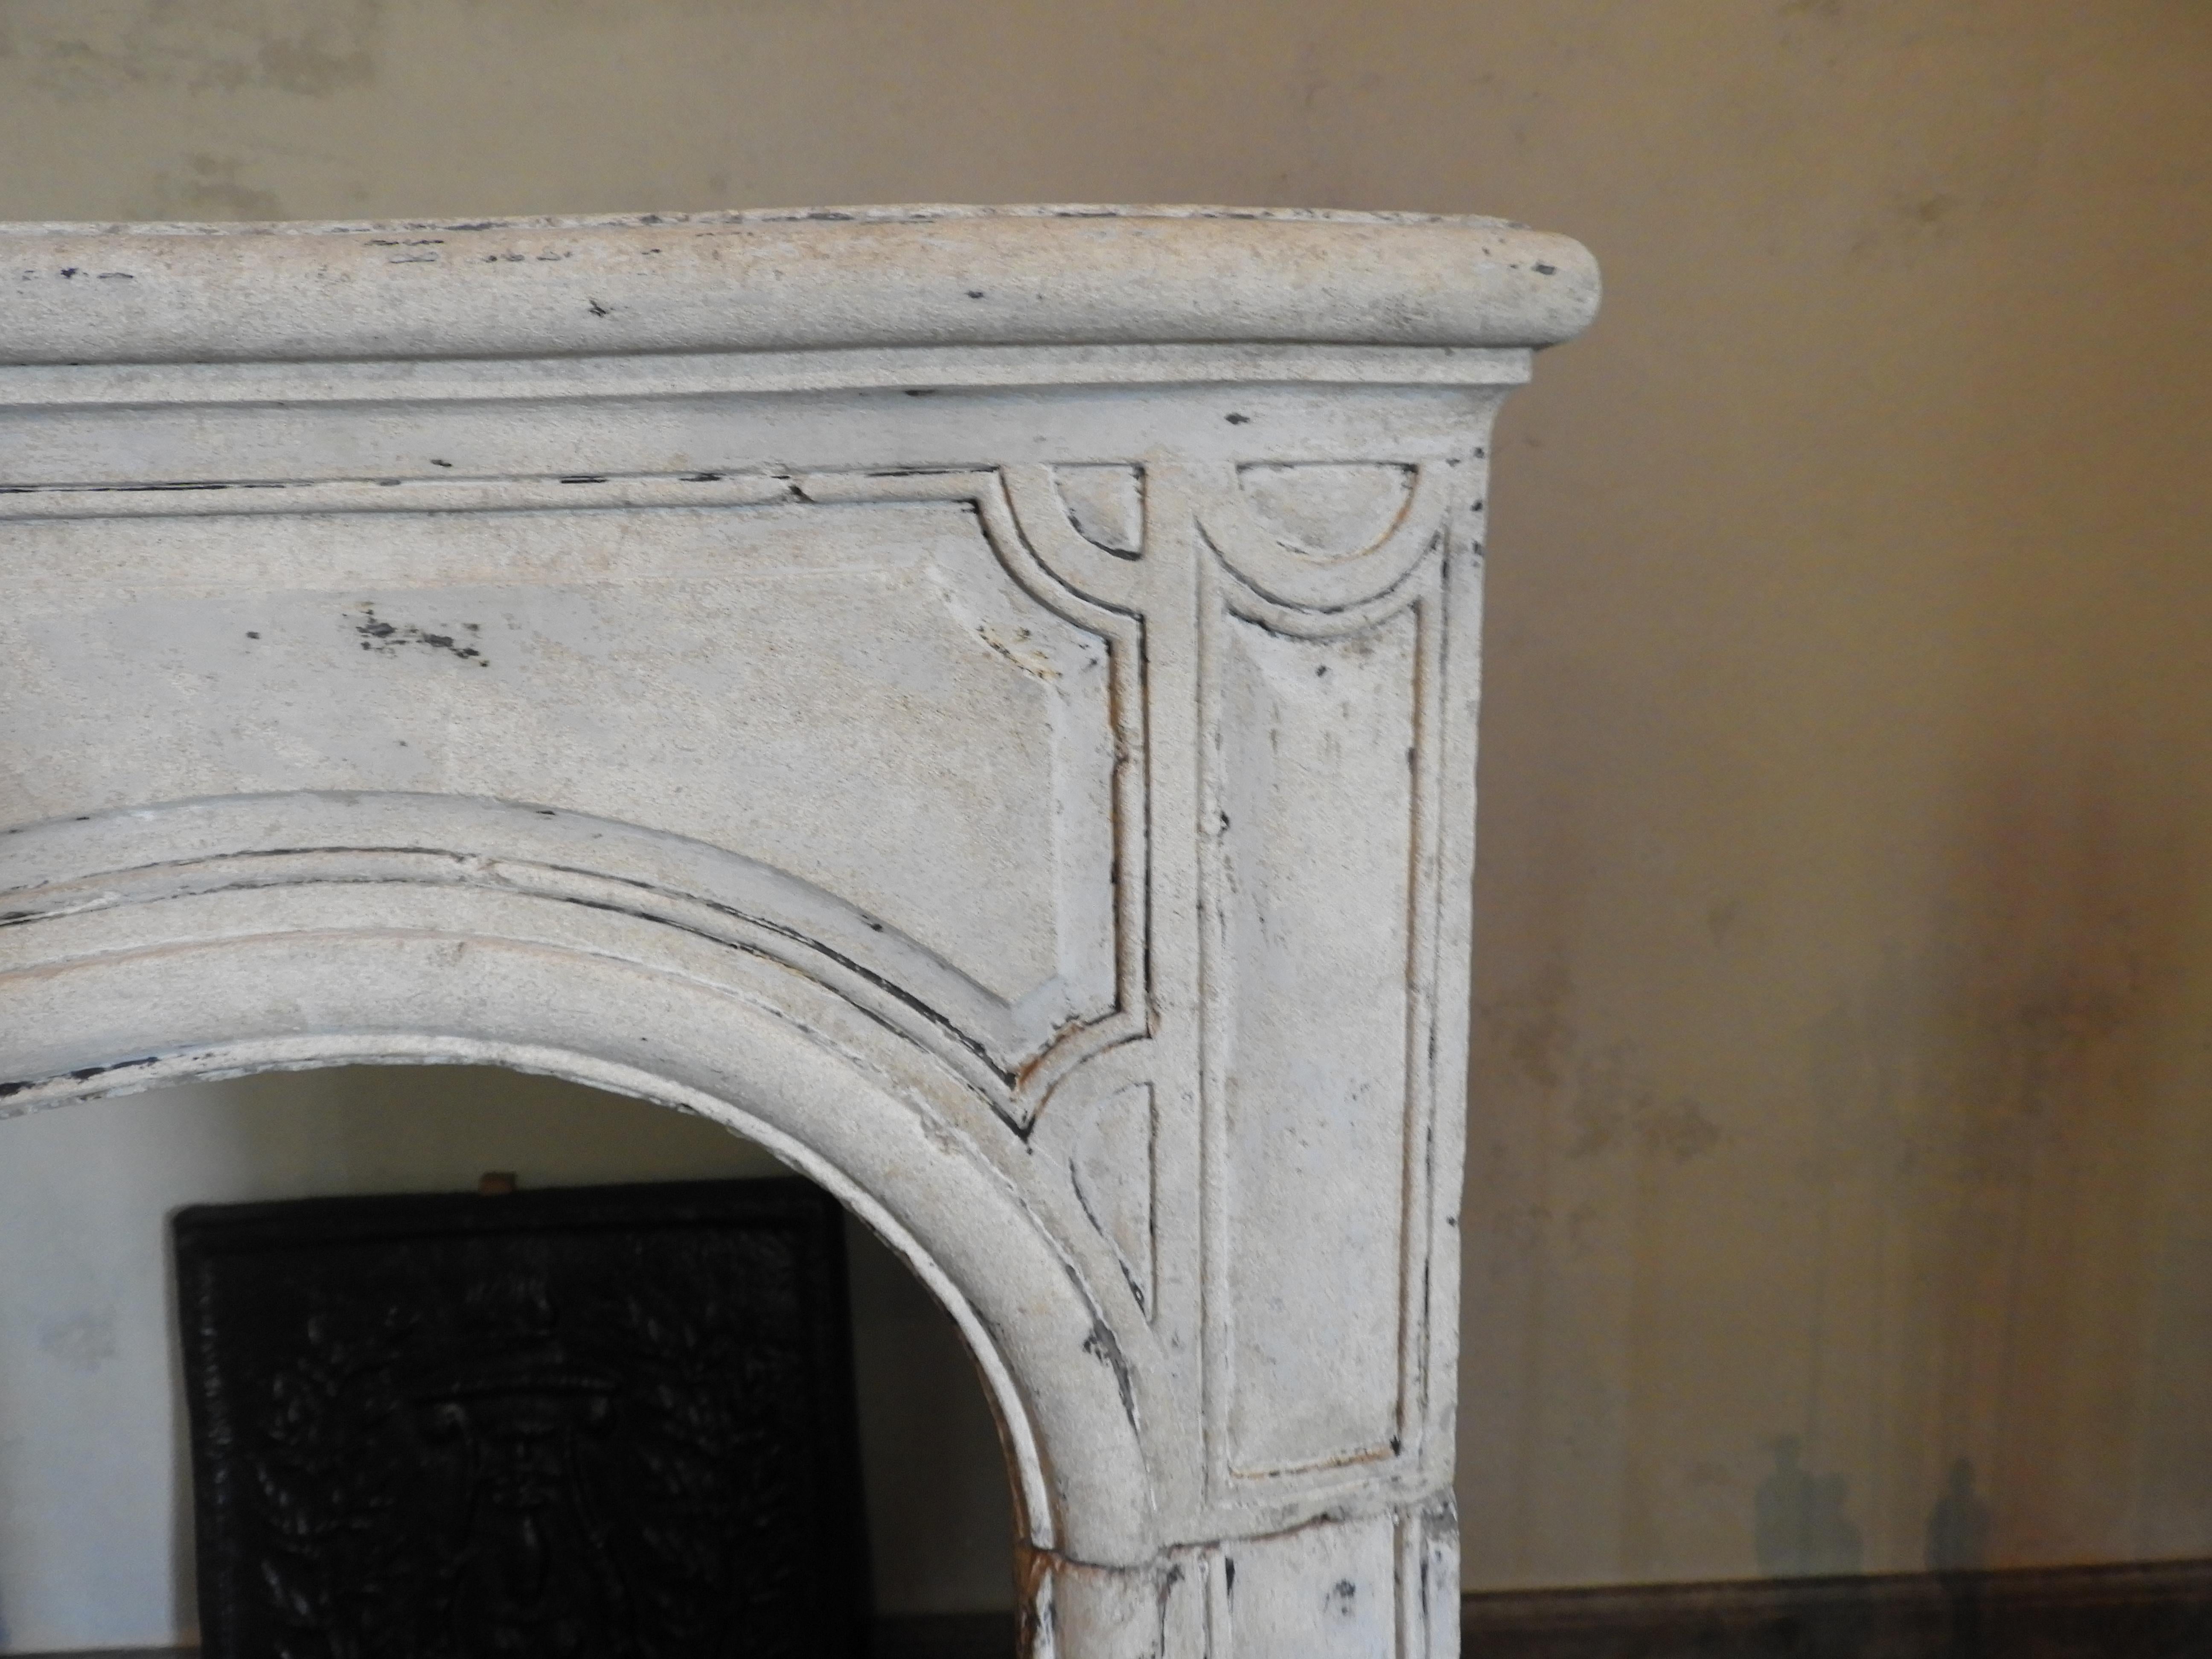 18th century Louis XIV fireplace in French limestone, white/cream colored.
Very nice small sized fireplace, not every day we find this type of fireplace in this small size.